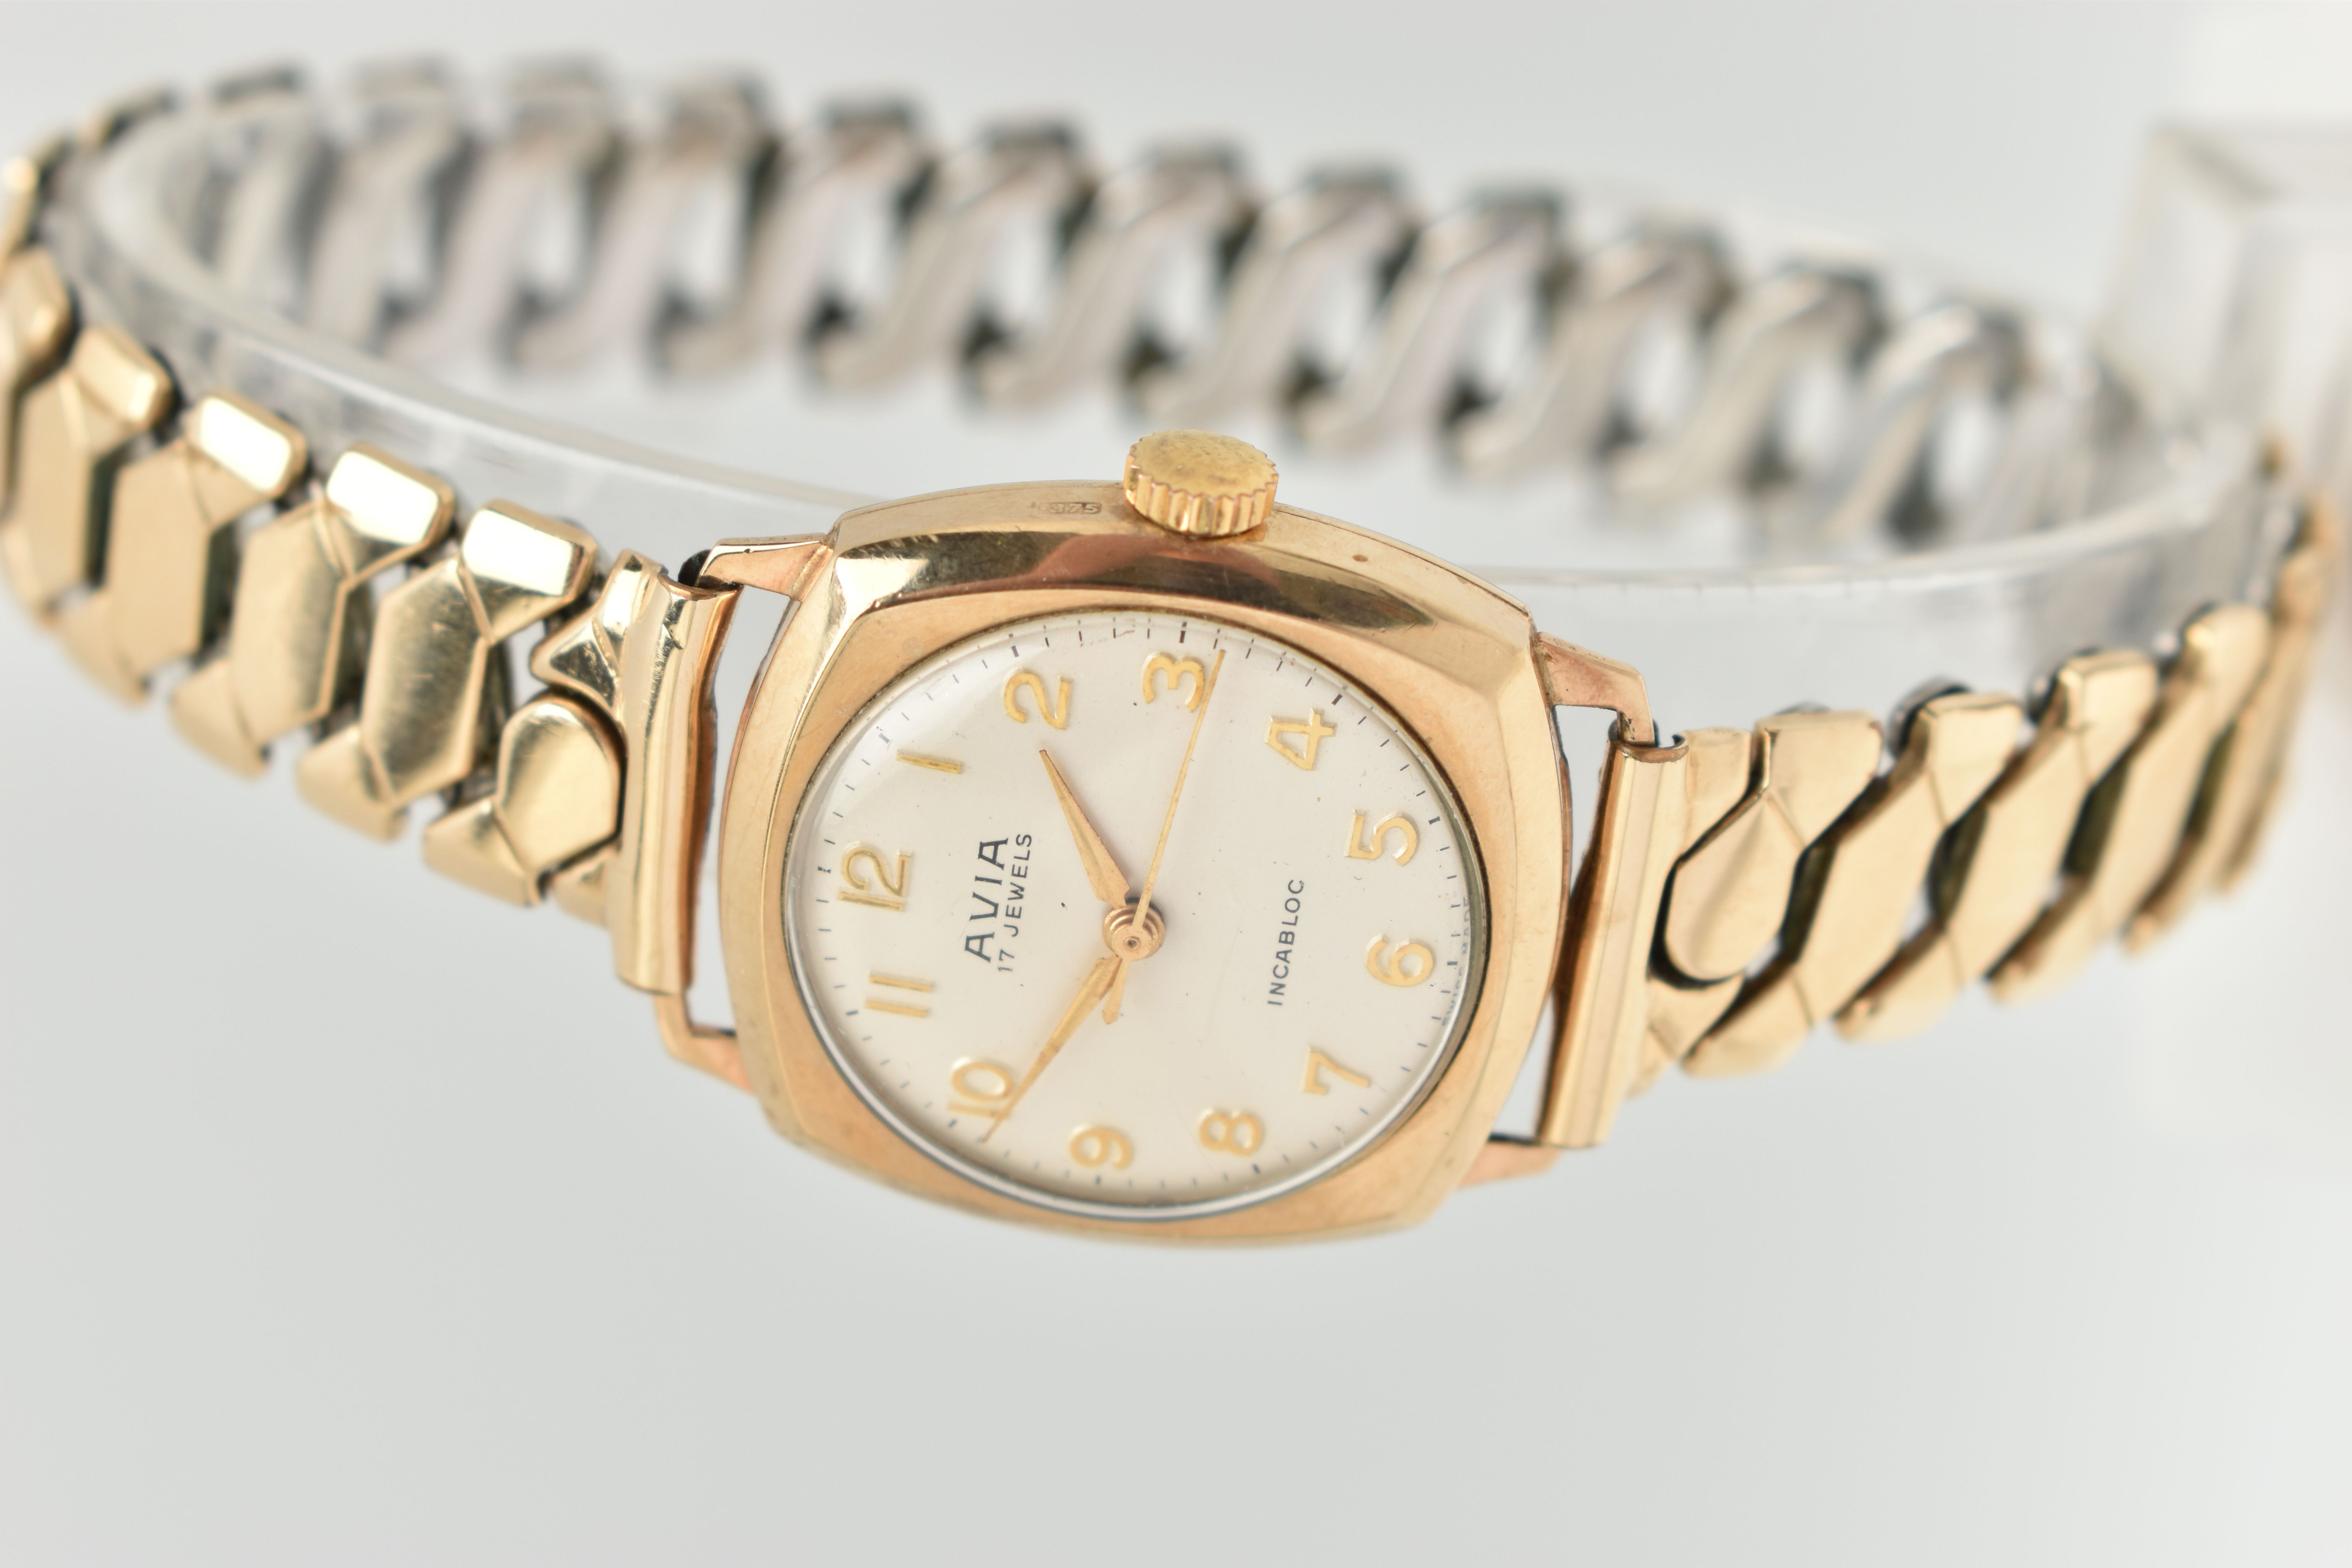 A 9CT GOLD 'AVIA' WRISTWATCH, manual wind, round silver dial signed 'Avia 17 Jewels, Incabloc', - Image 3 of 6